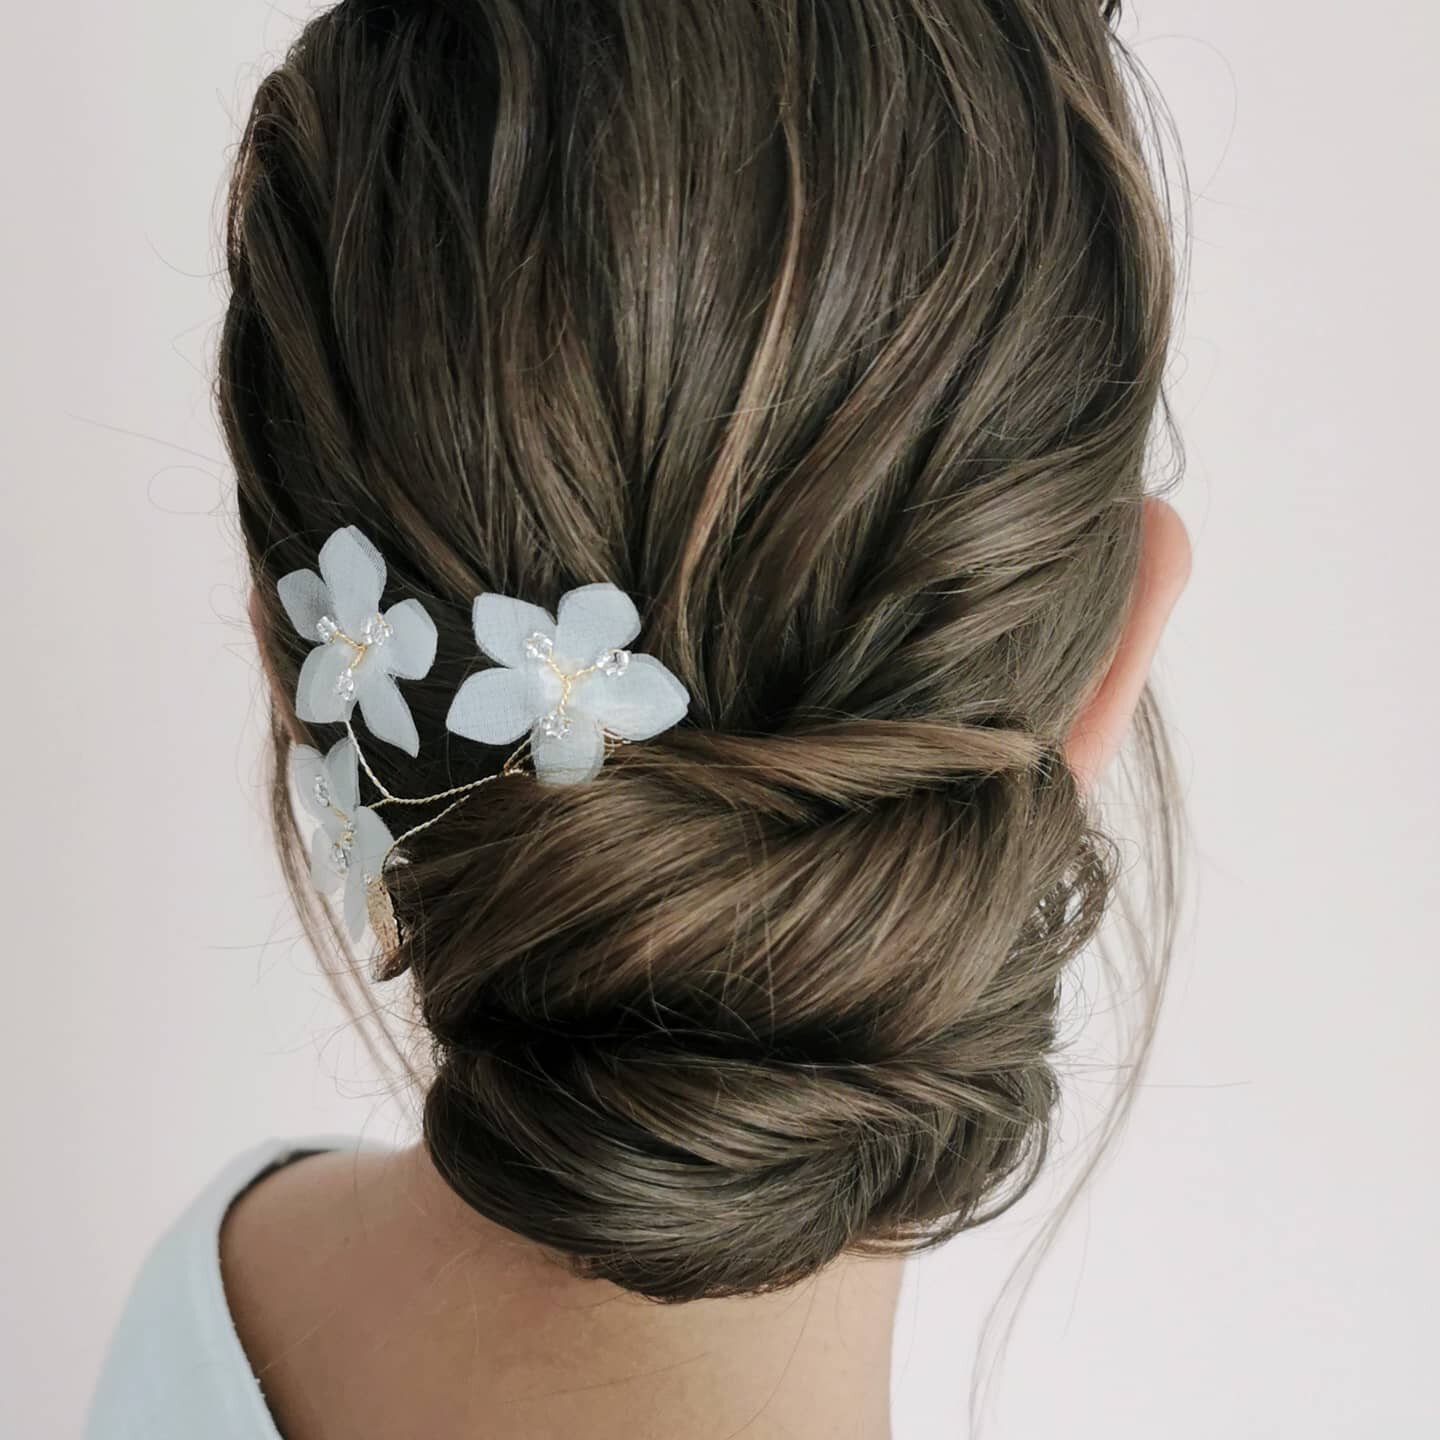 THERE ARE SO MANY OPTIONS for a low bun depending on your length and thickness of hair.
Dont forget though padding and an added hair extension can be a hair stylists best friend for adding a little extra help when styling wedding hair on shorter fine